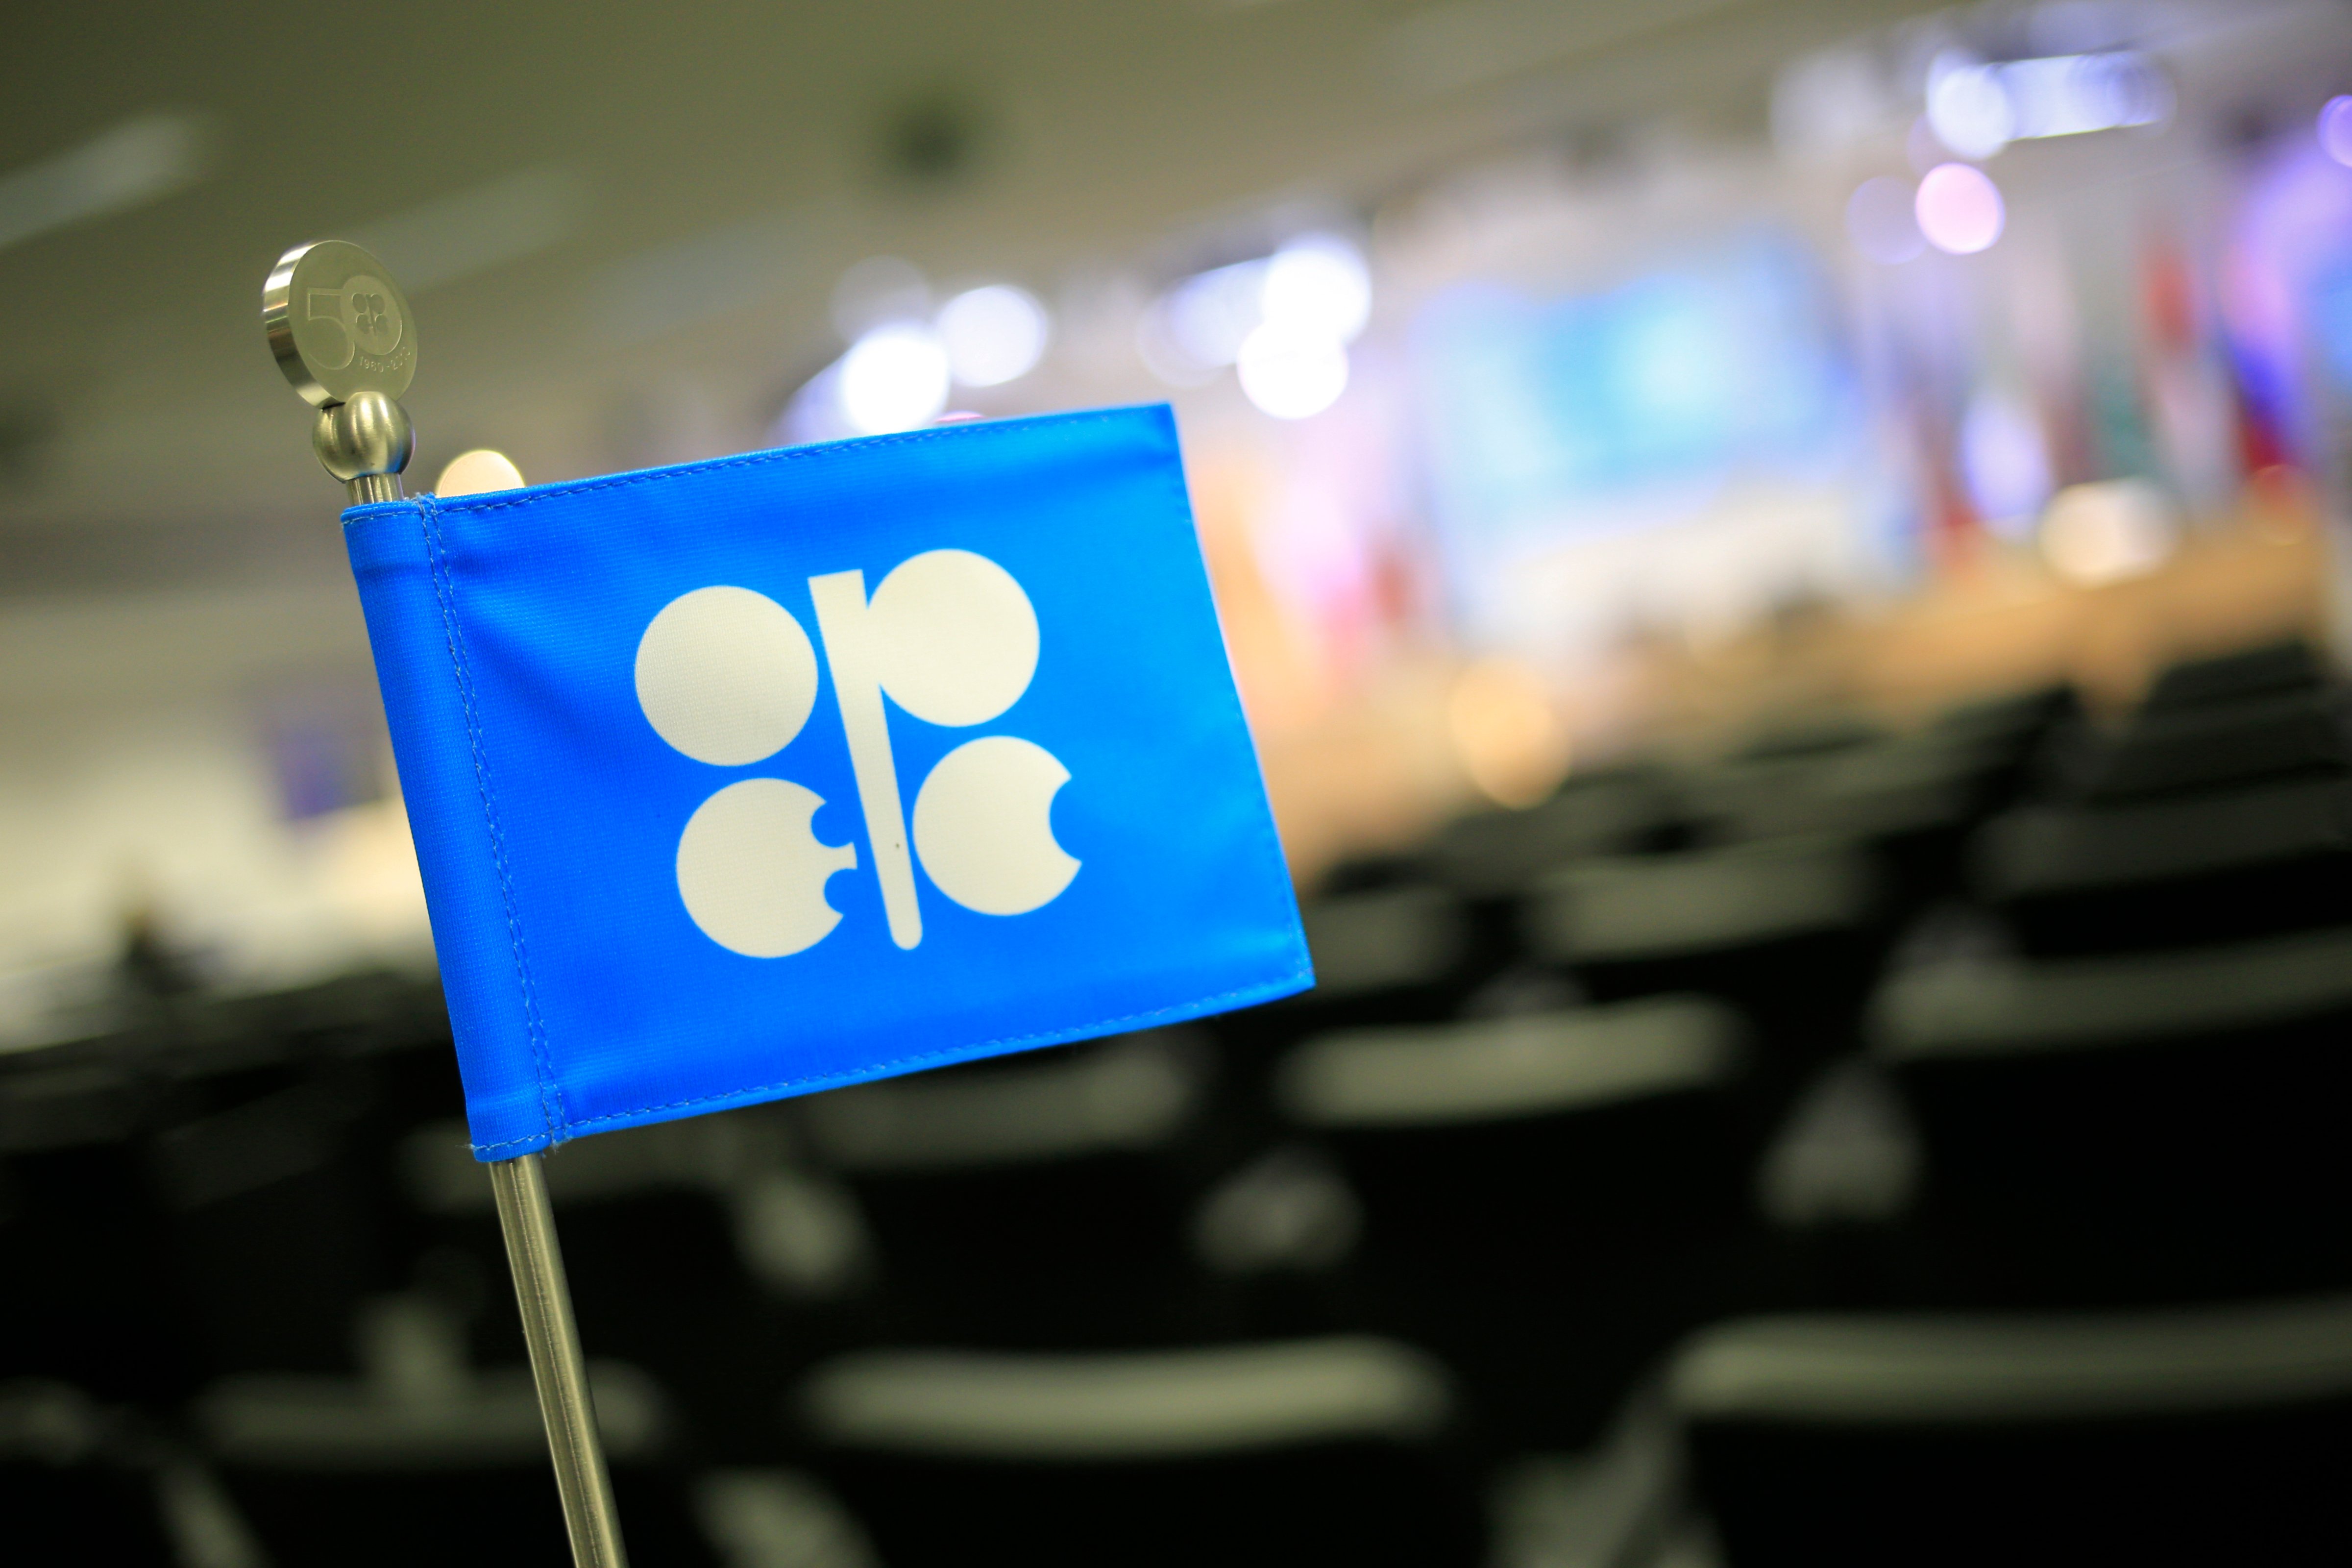 OPEC flag at the organization's headquarter on the eve of the 164th OPEC meeting in Vienna on Dec. 3, 2013. (Alexander Klein—AFP/Getty Images)